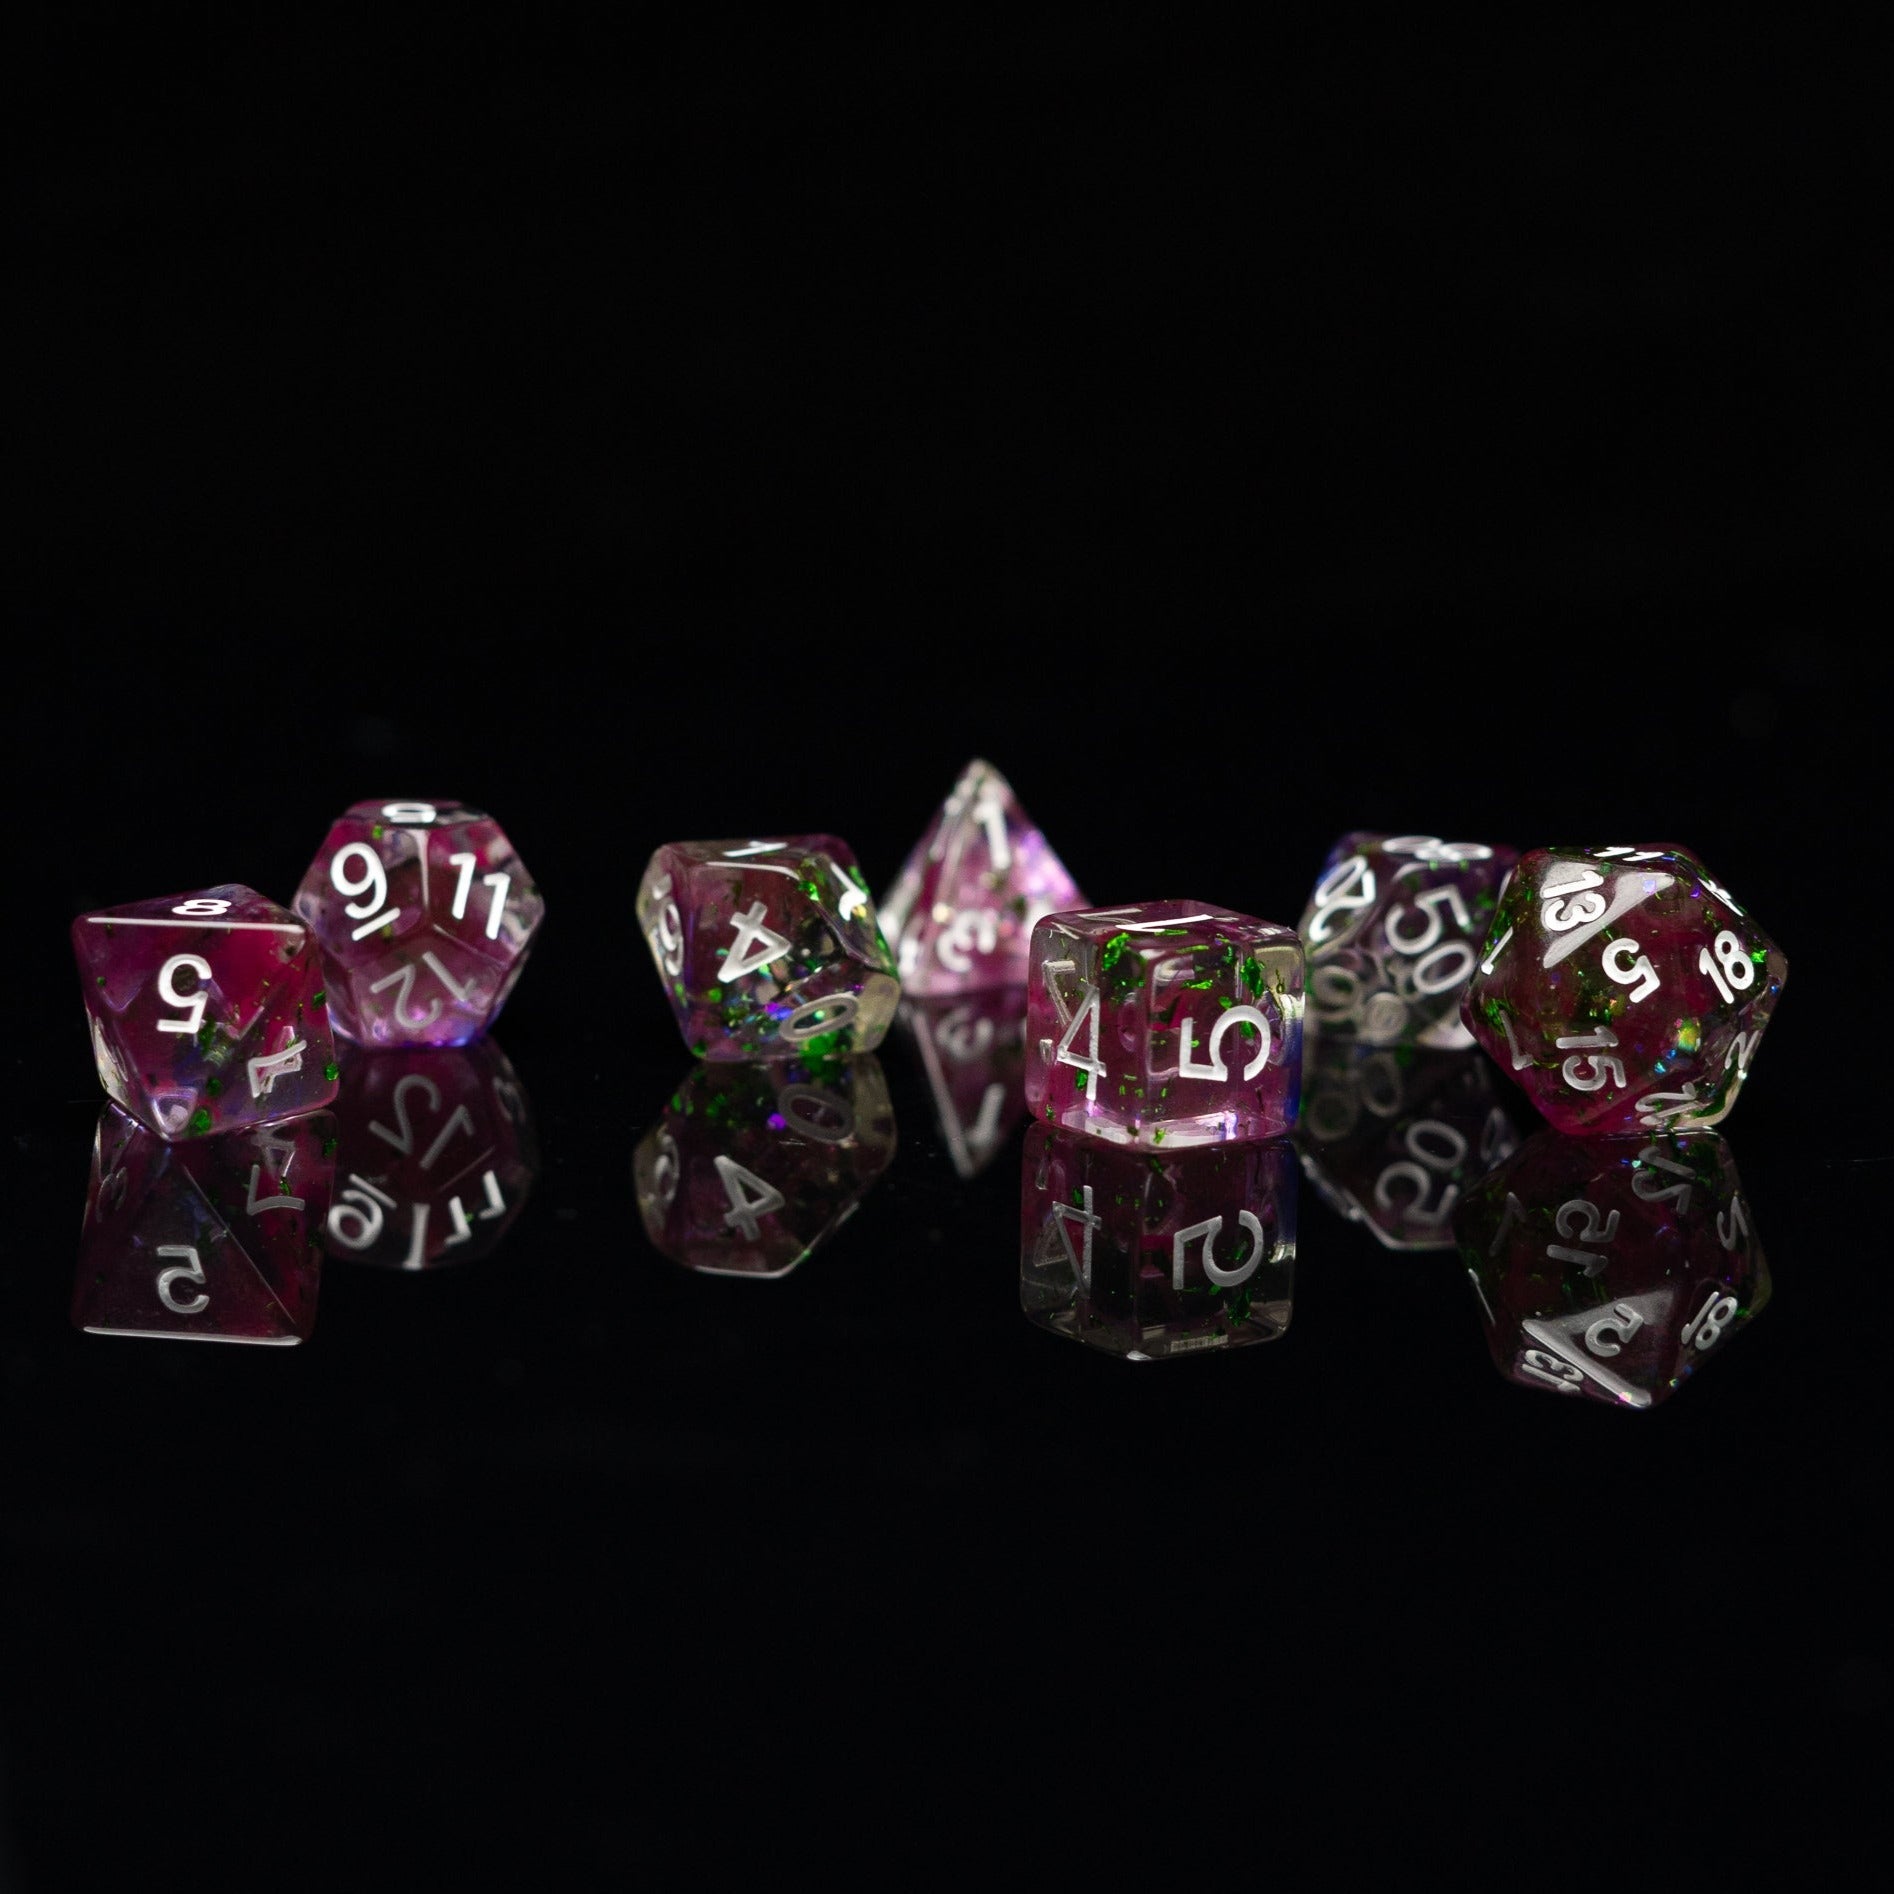 Roll Britannia Malrus and Milo Tosscobble Dnd Dice Set with Swirling Purple and Green Glitter Aesthetic